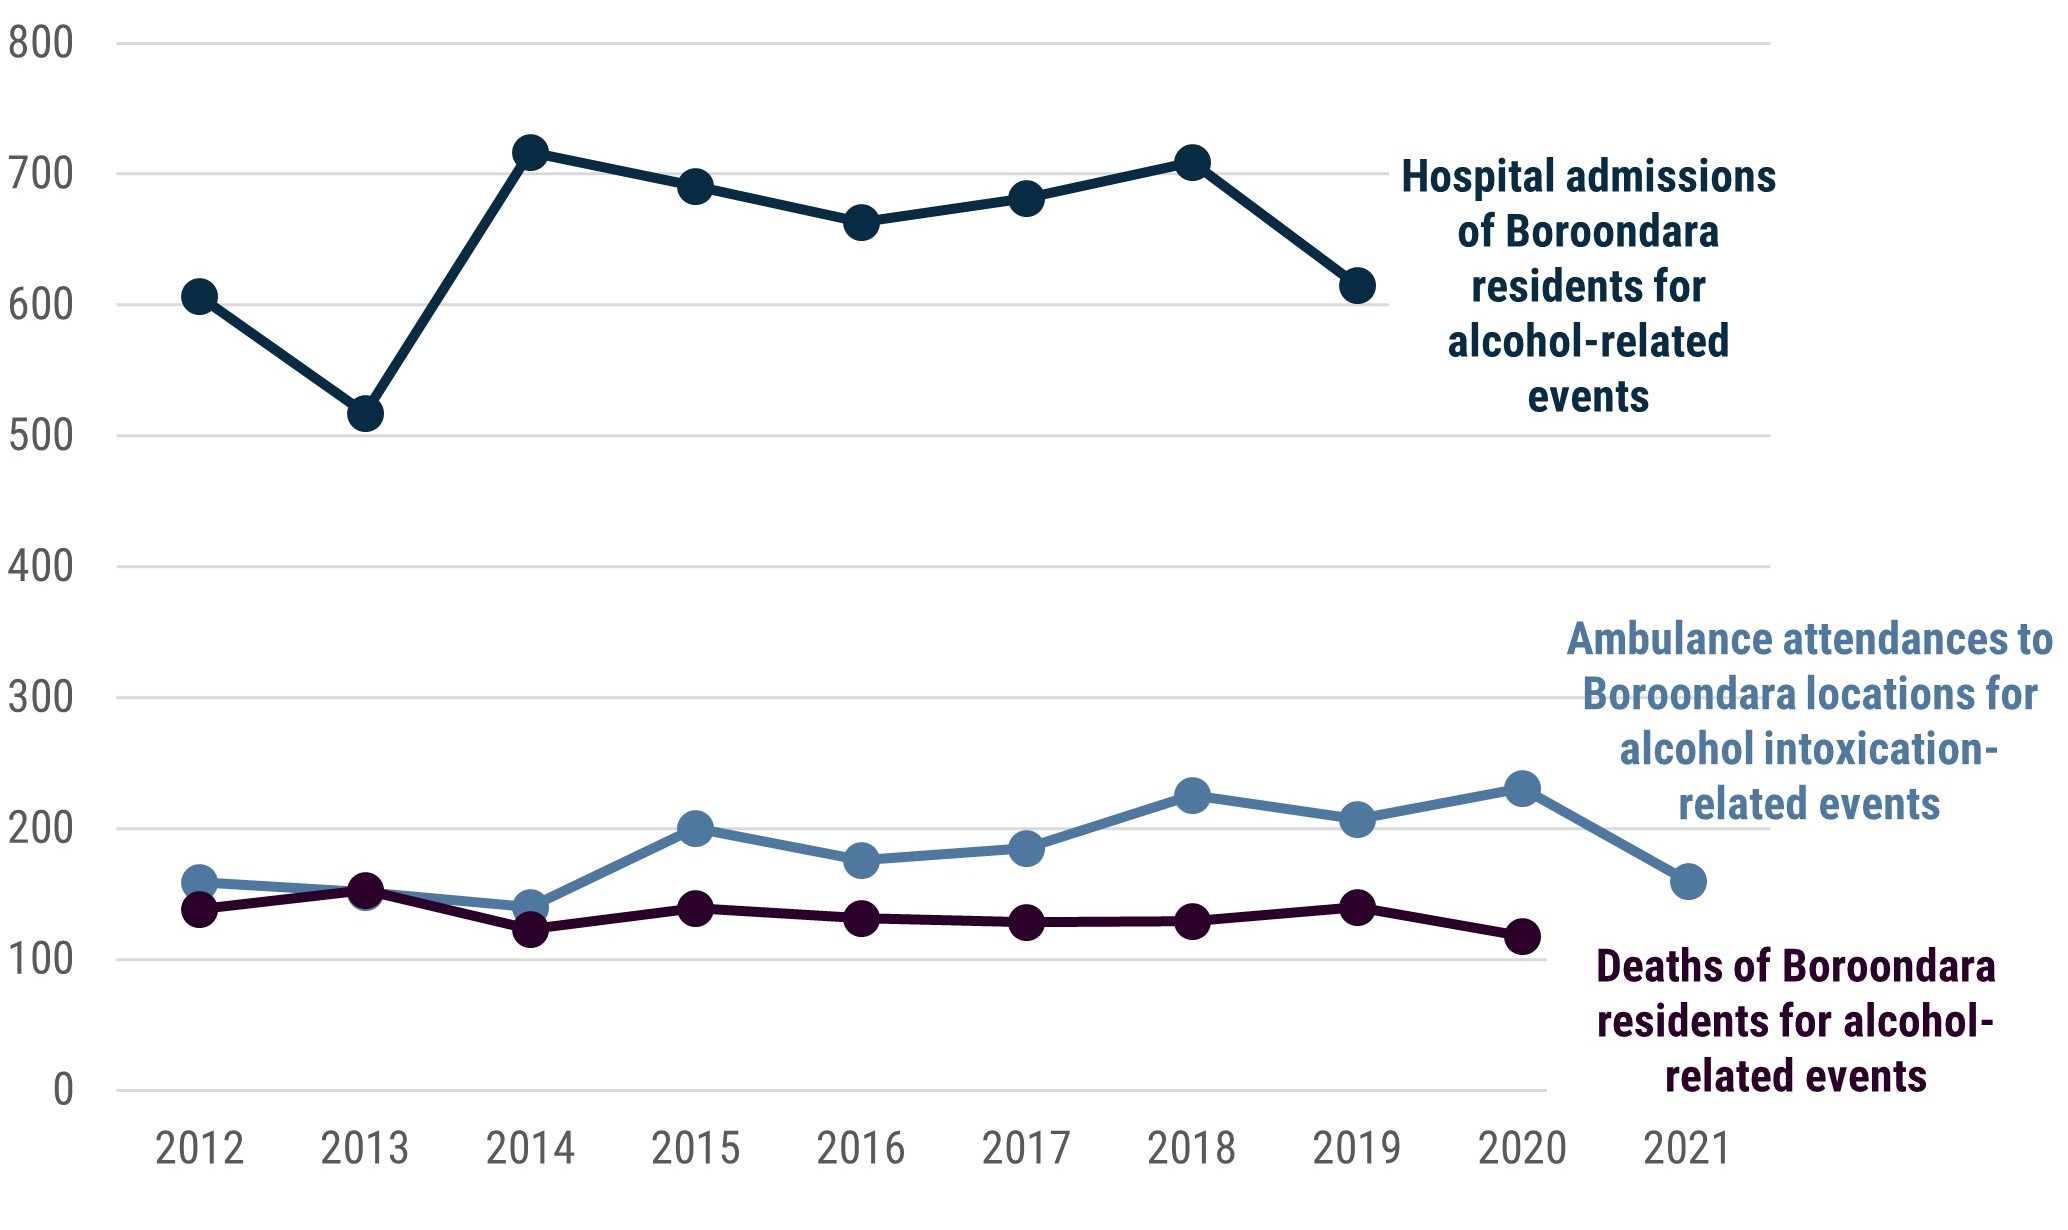 Line chart which shows that between 2014 and 2018 the alcohol-related hospital admission rate for Boroondara residents varied between 717 and 663. It dropped to 615 in 2019. Deaths ranged between a maximum of 153 (in 2013) to a minimum of 117 (in 2020) per year between 2012 and 2020. Ambulance attendances to alcohol intoxication related events in Boroondara seem to be trending upward with a low of 173 per 100,000 residents in 2014–15 and a high of 286 per 100,000 residents in 2020–21. In 2021–22 it dropped 